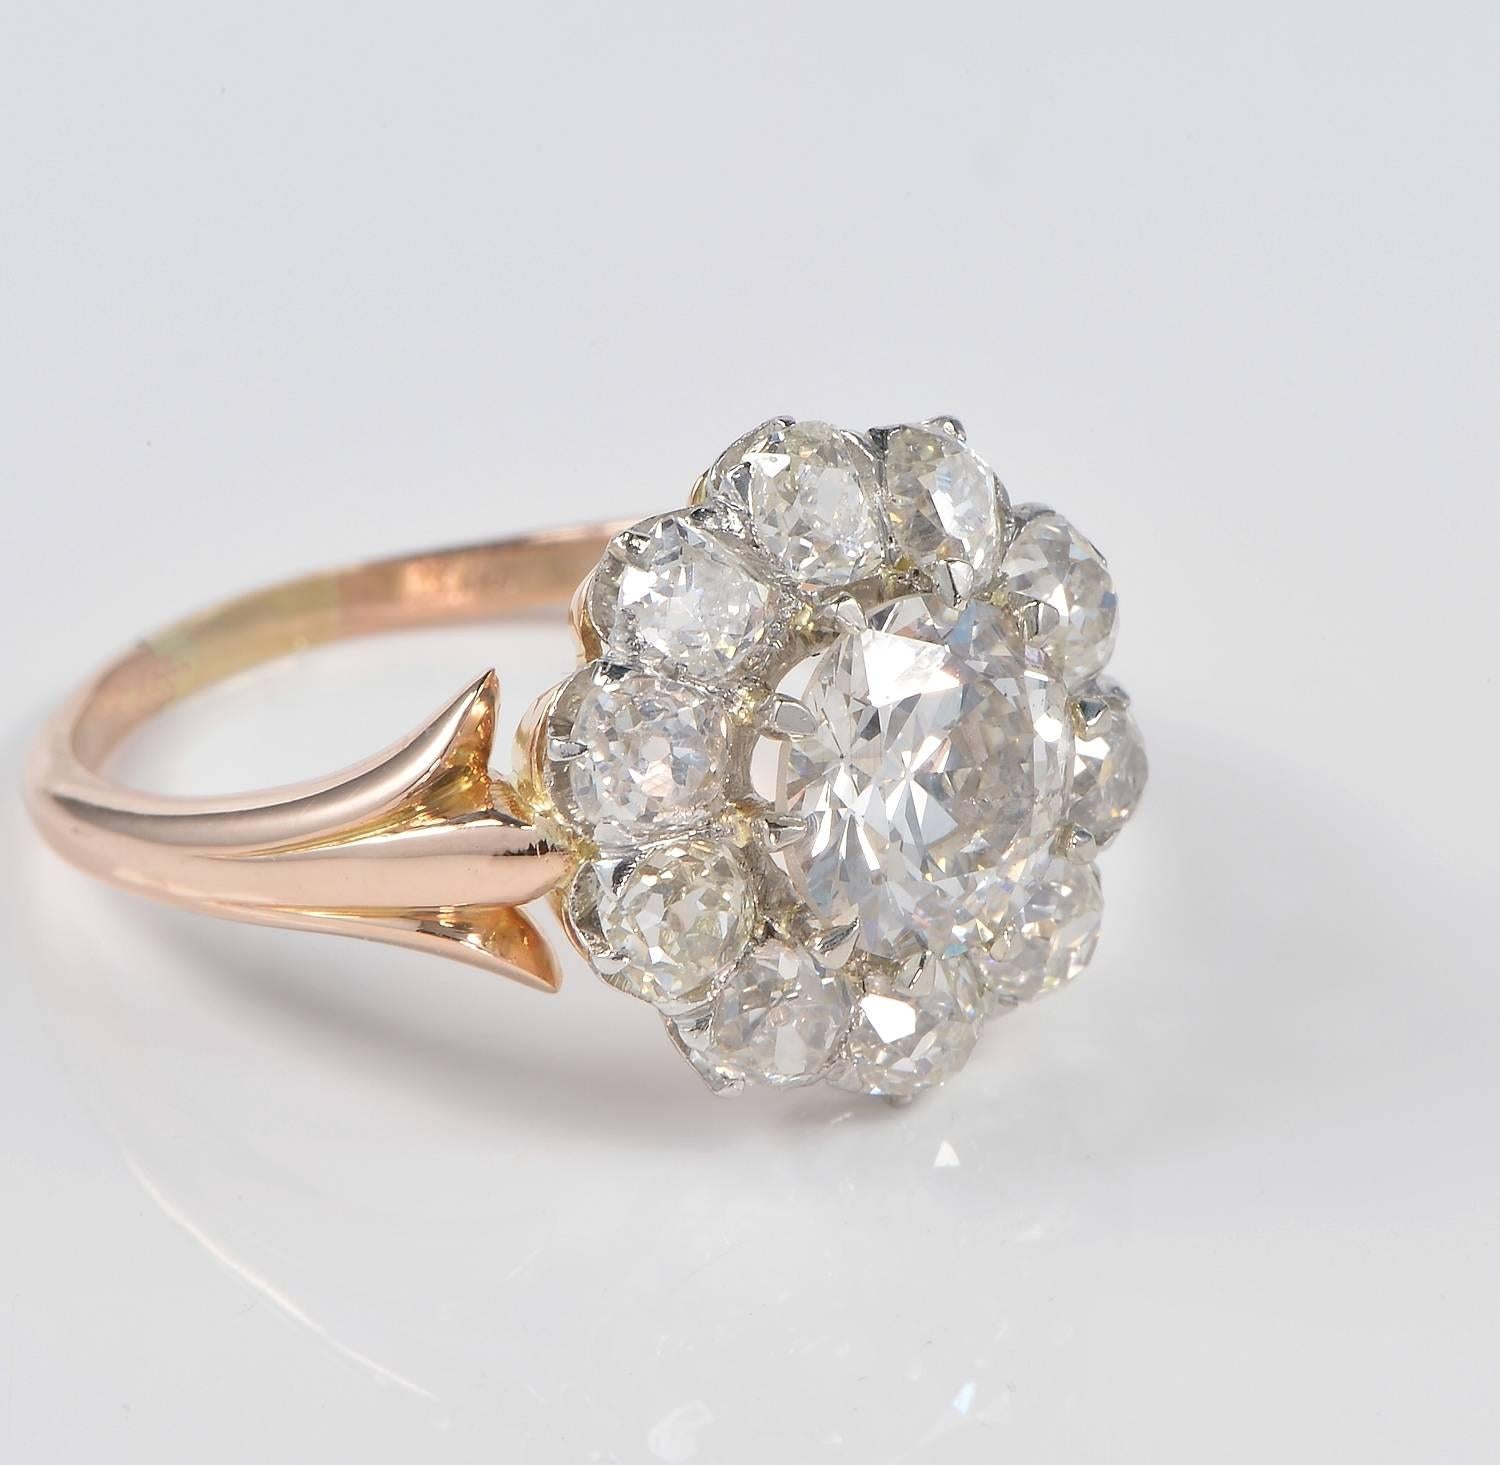 Bright your eyes with this stunning Edwardian era Diamond cluster ring!
Authentic from 1900 ca- outstanding mounting hand crafted of 18 KT rose gold and Platinum, possibly French having hallmarks quite worn to read due to age
Impressive Diamond